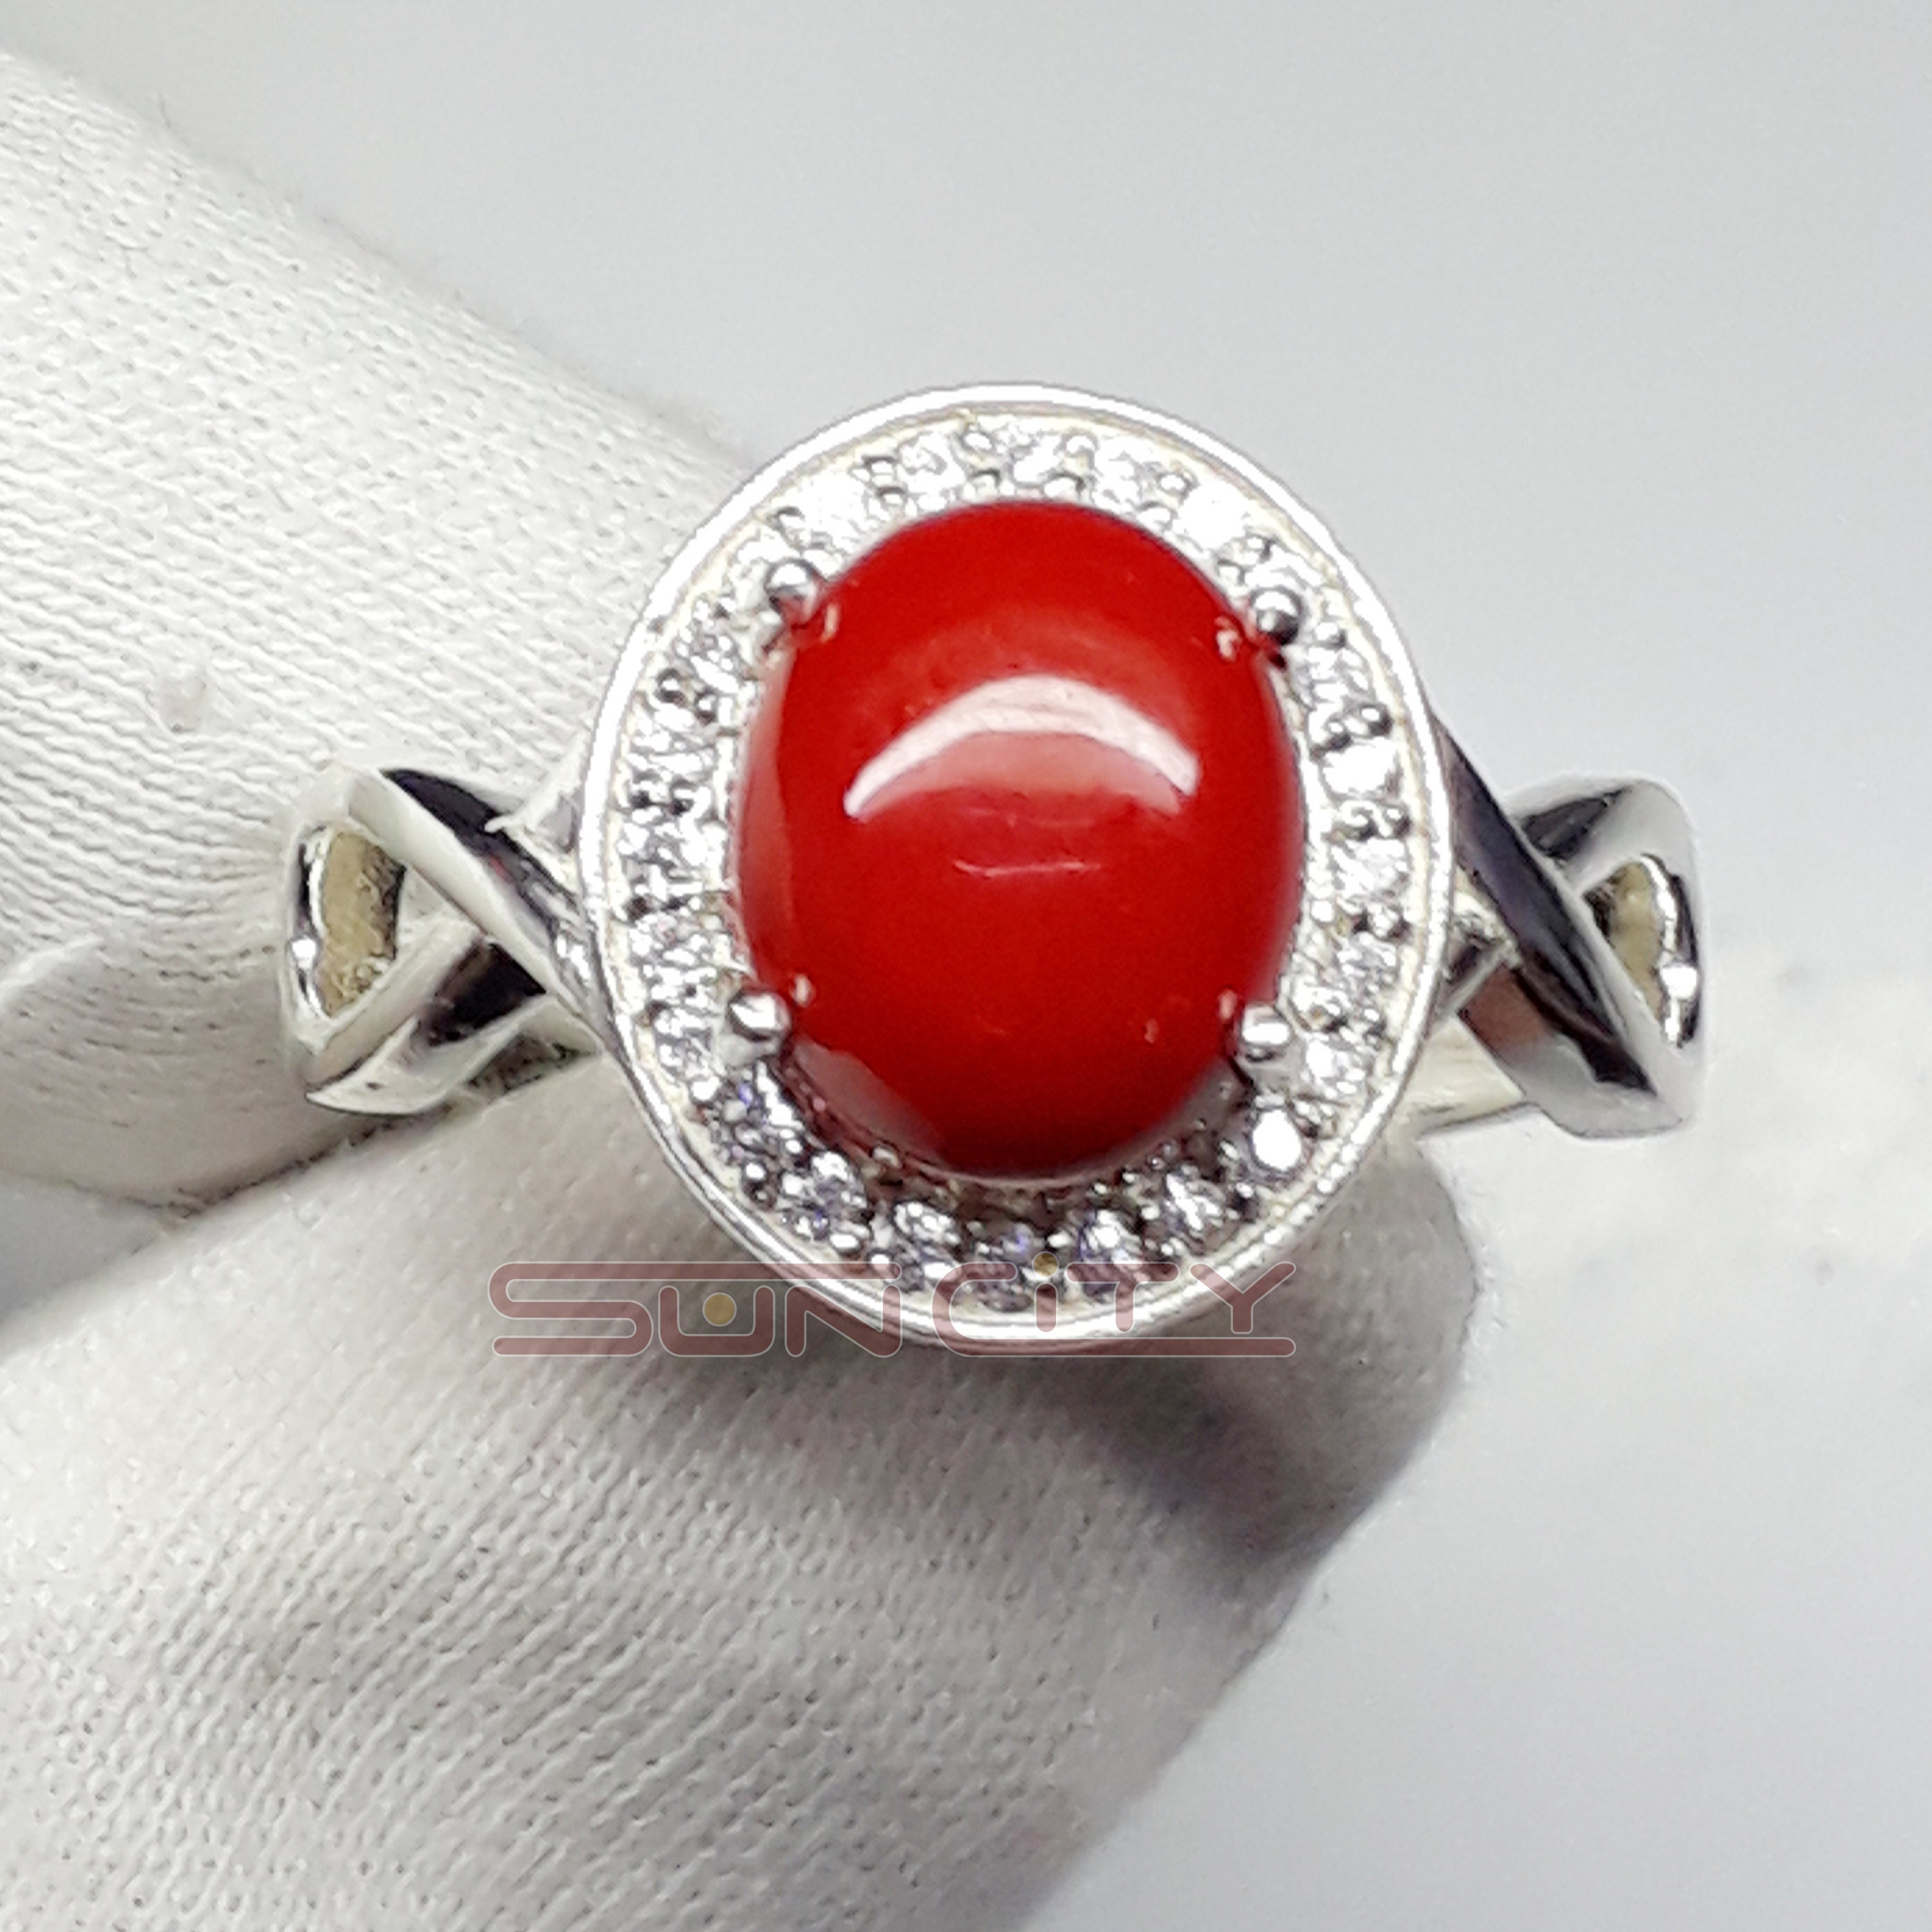 Buy quality 92.5 Silver Red Stone Fancy Ladies Ring in Ahmedabad